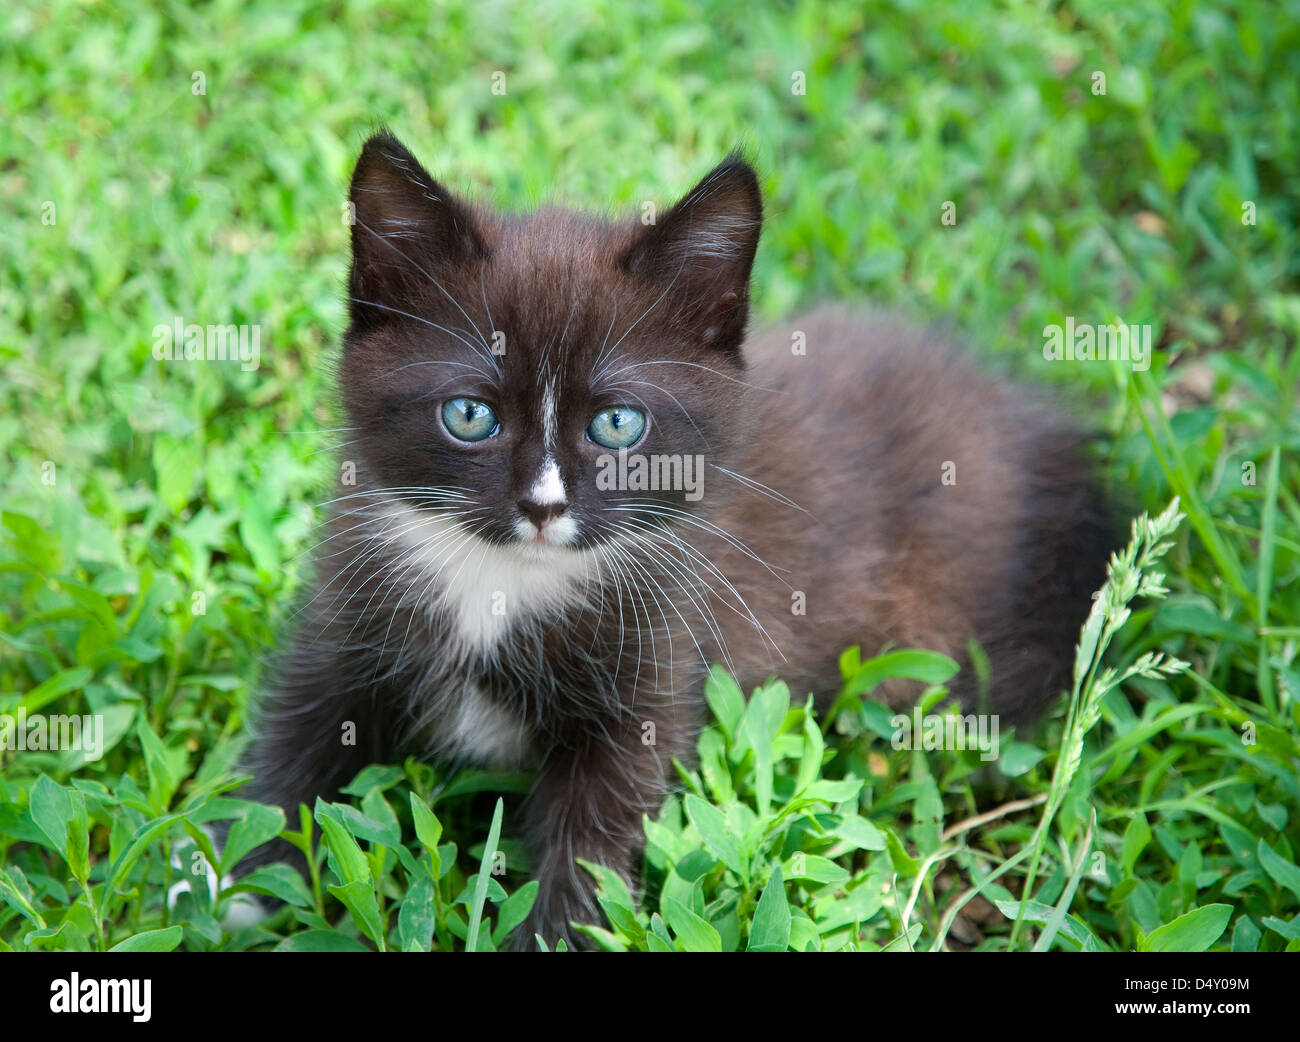 The brown kitten sits in a green grass Stock Photo